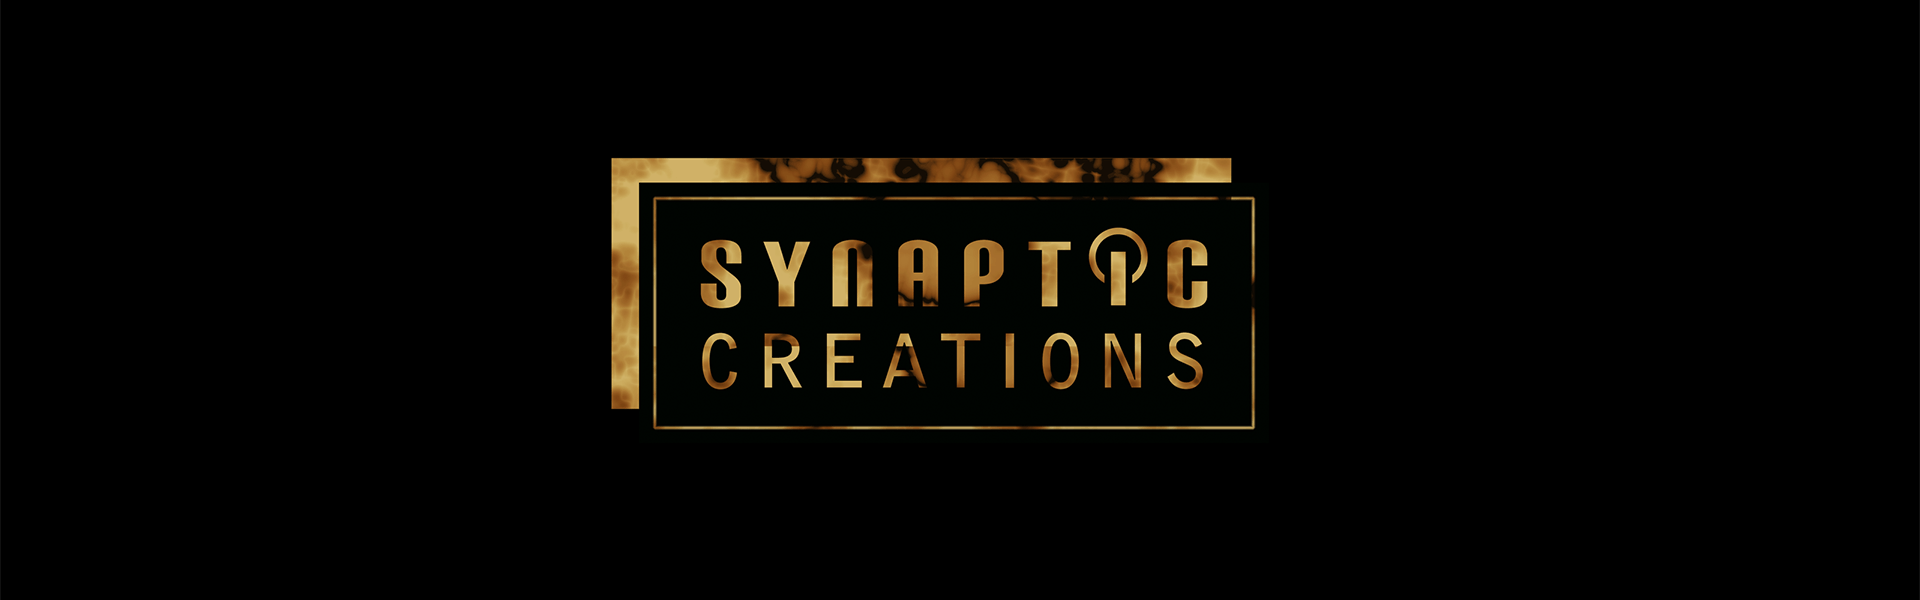 Synaptic Creations